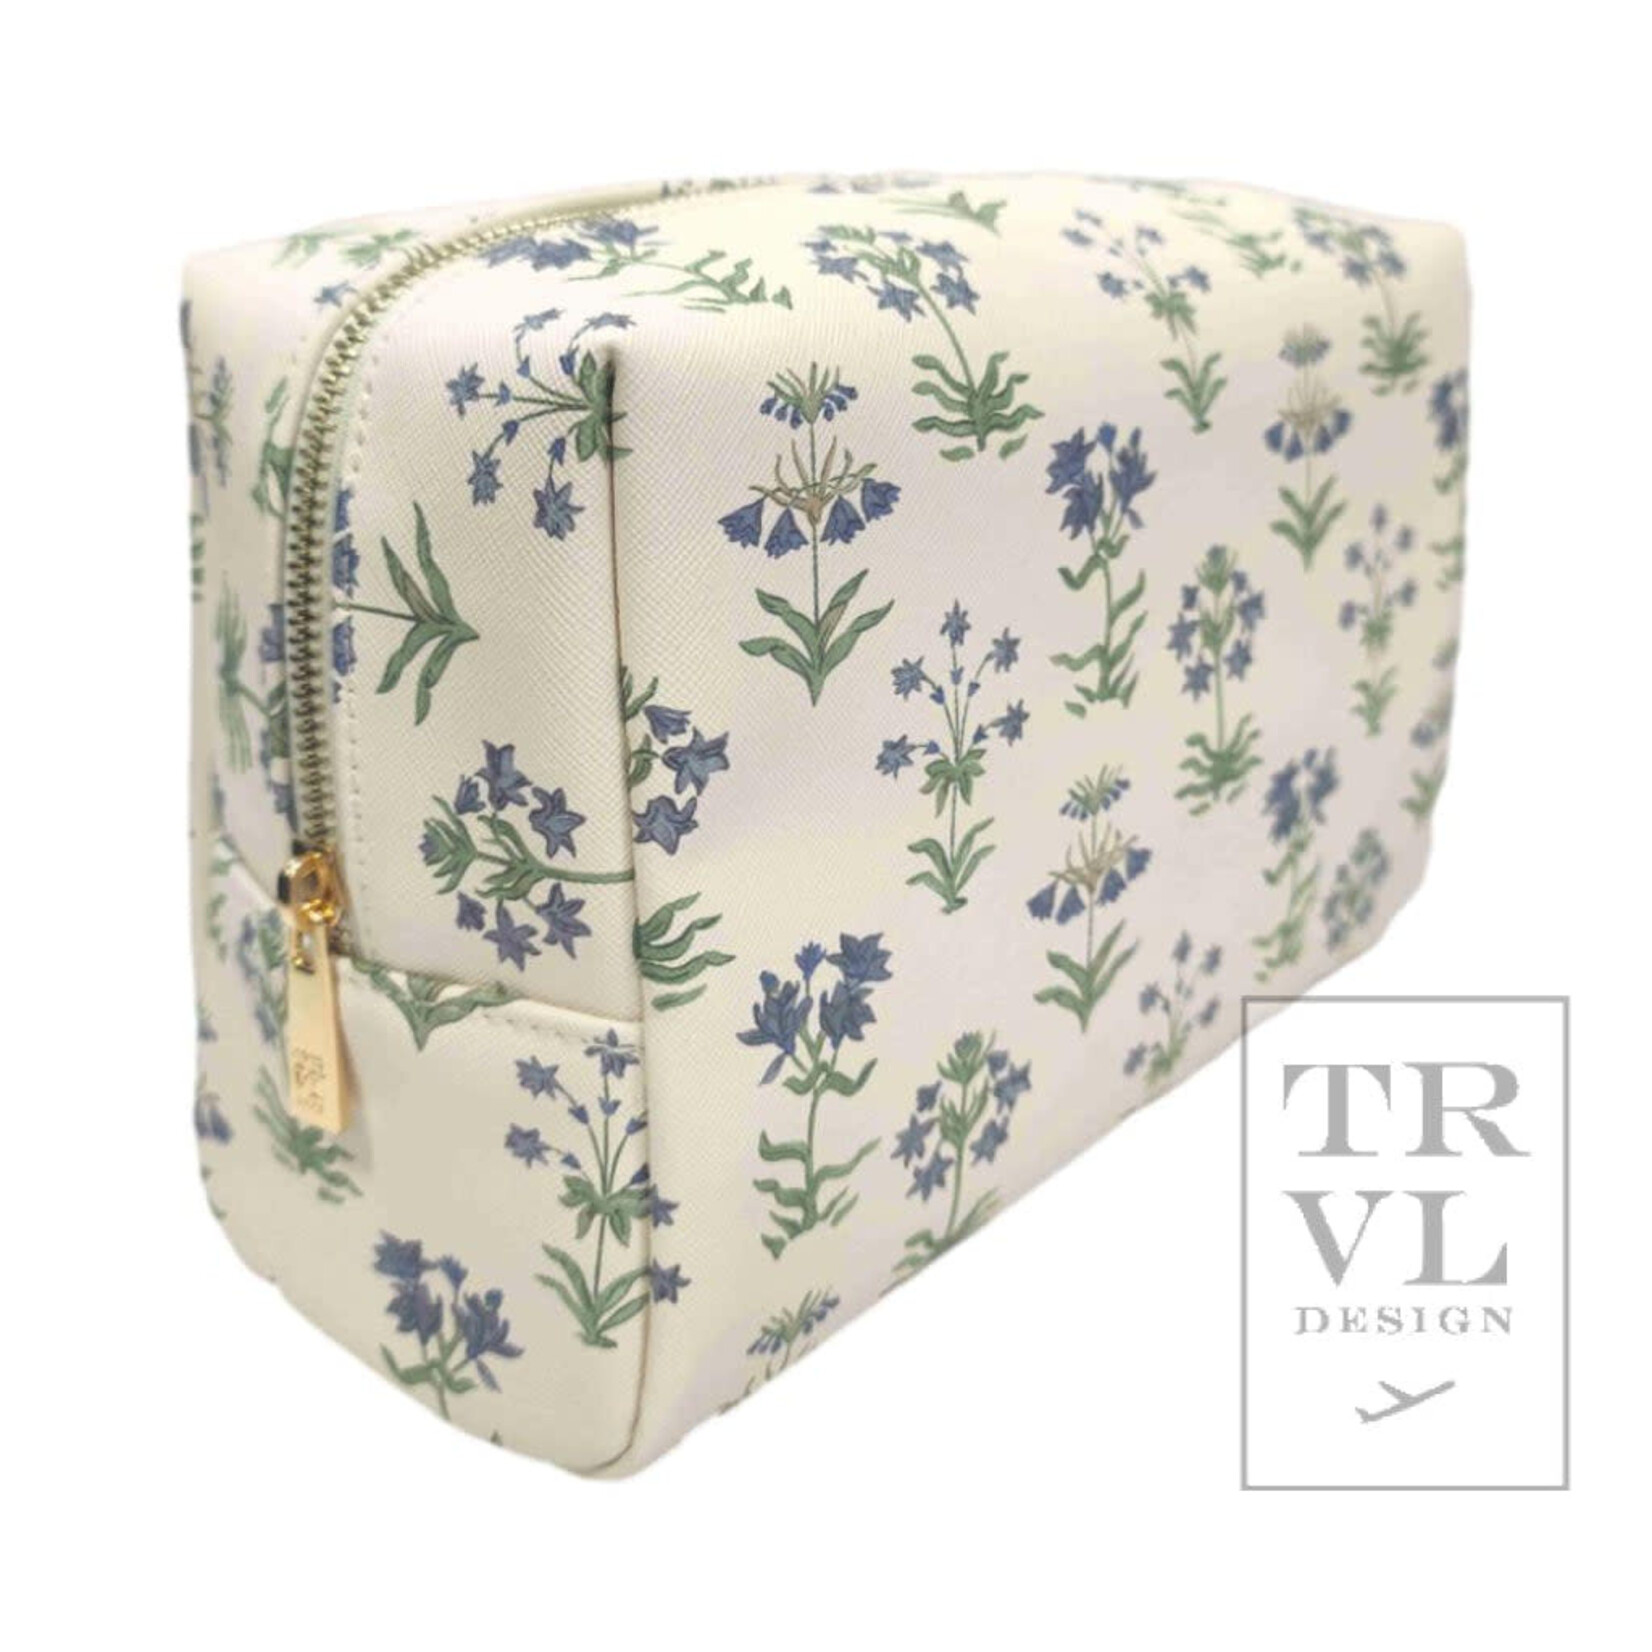 TRVL Design LUXE PROVENCE COSMETIC BAG EVERYDAY